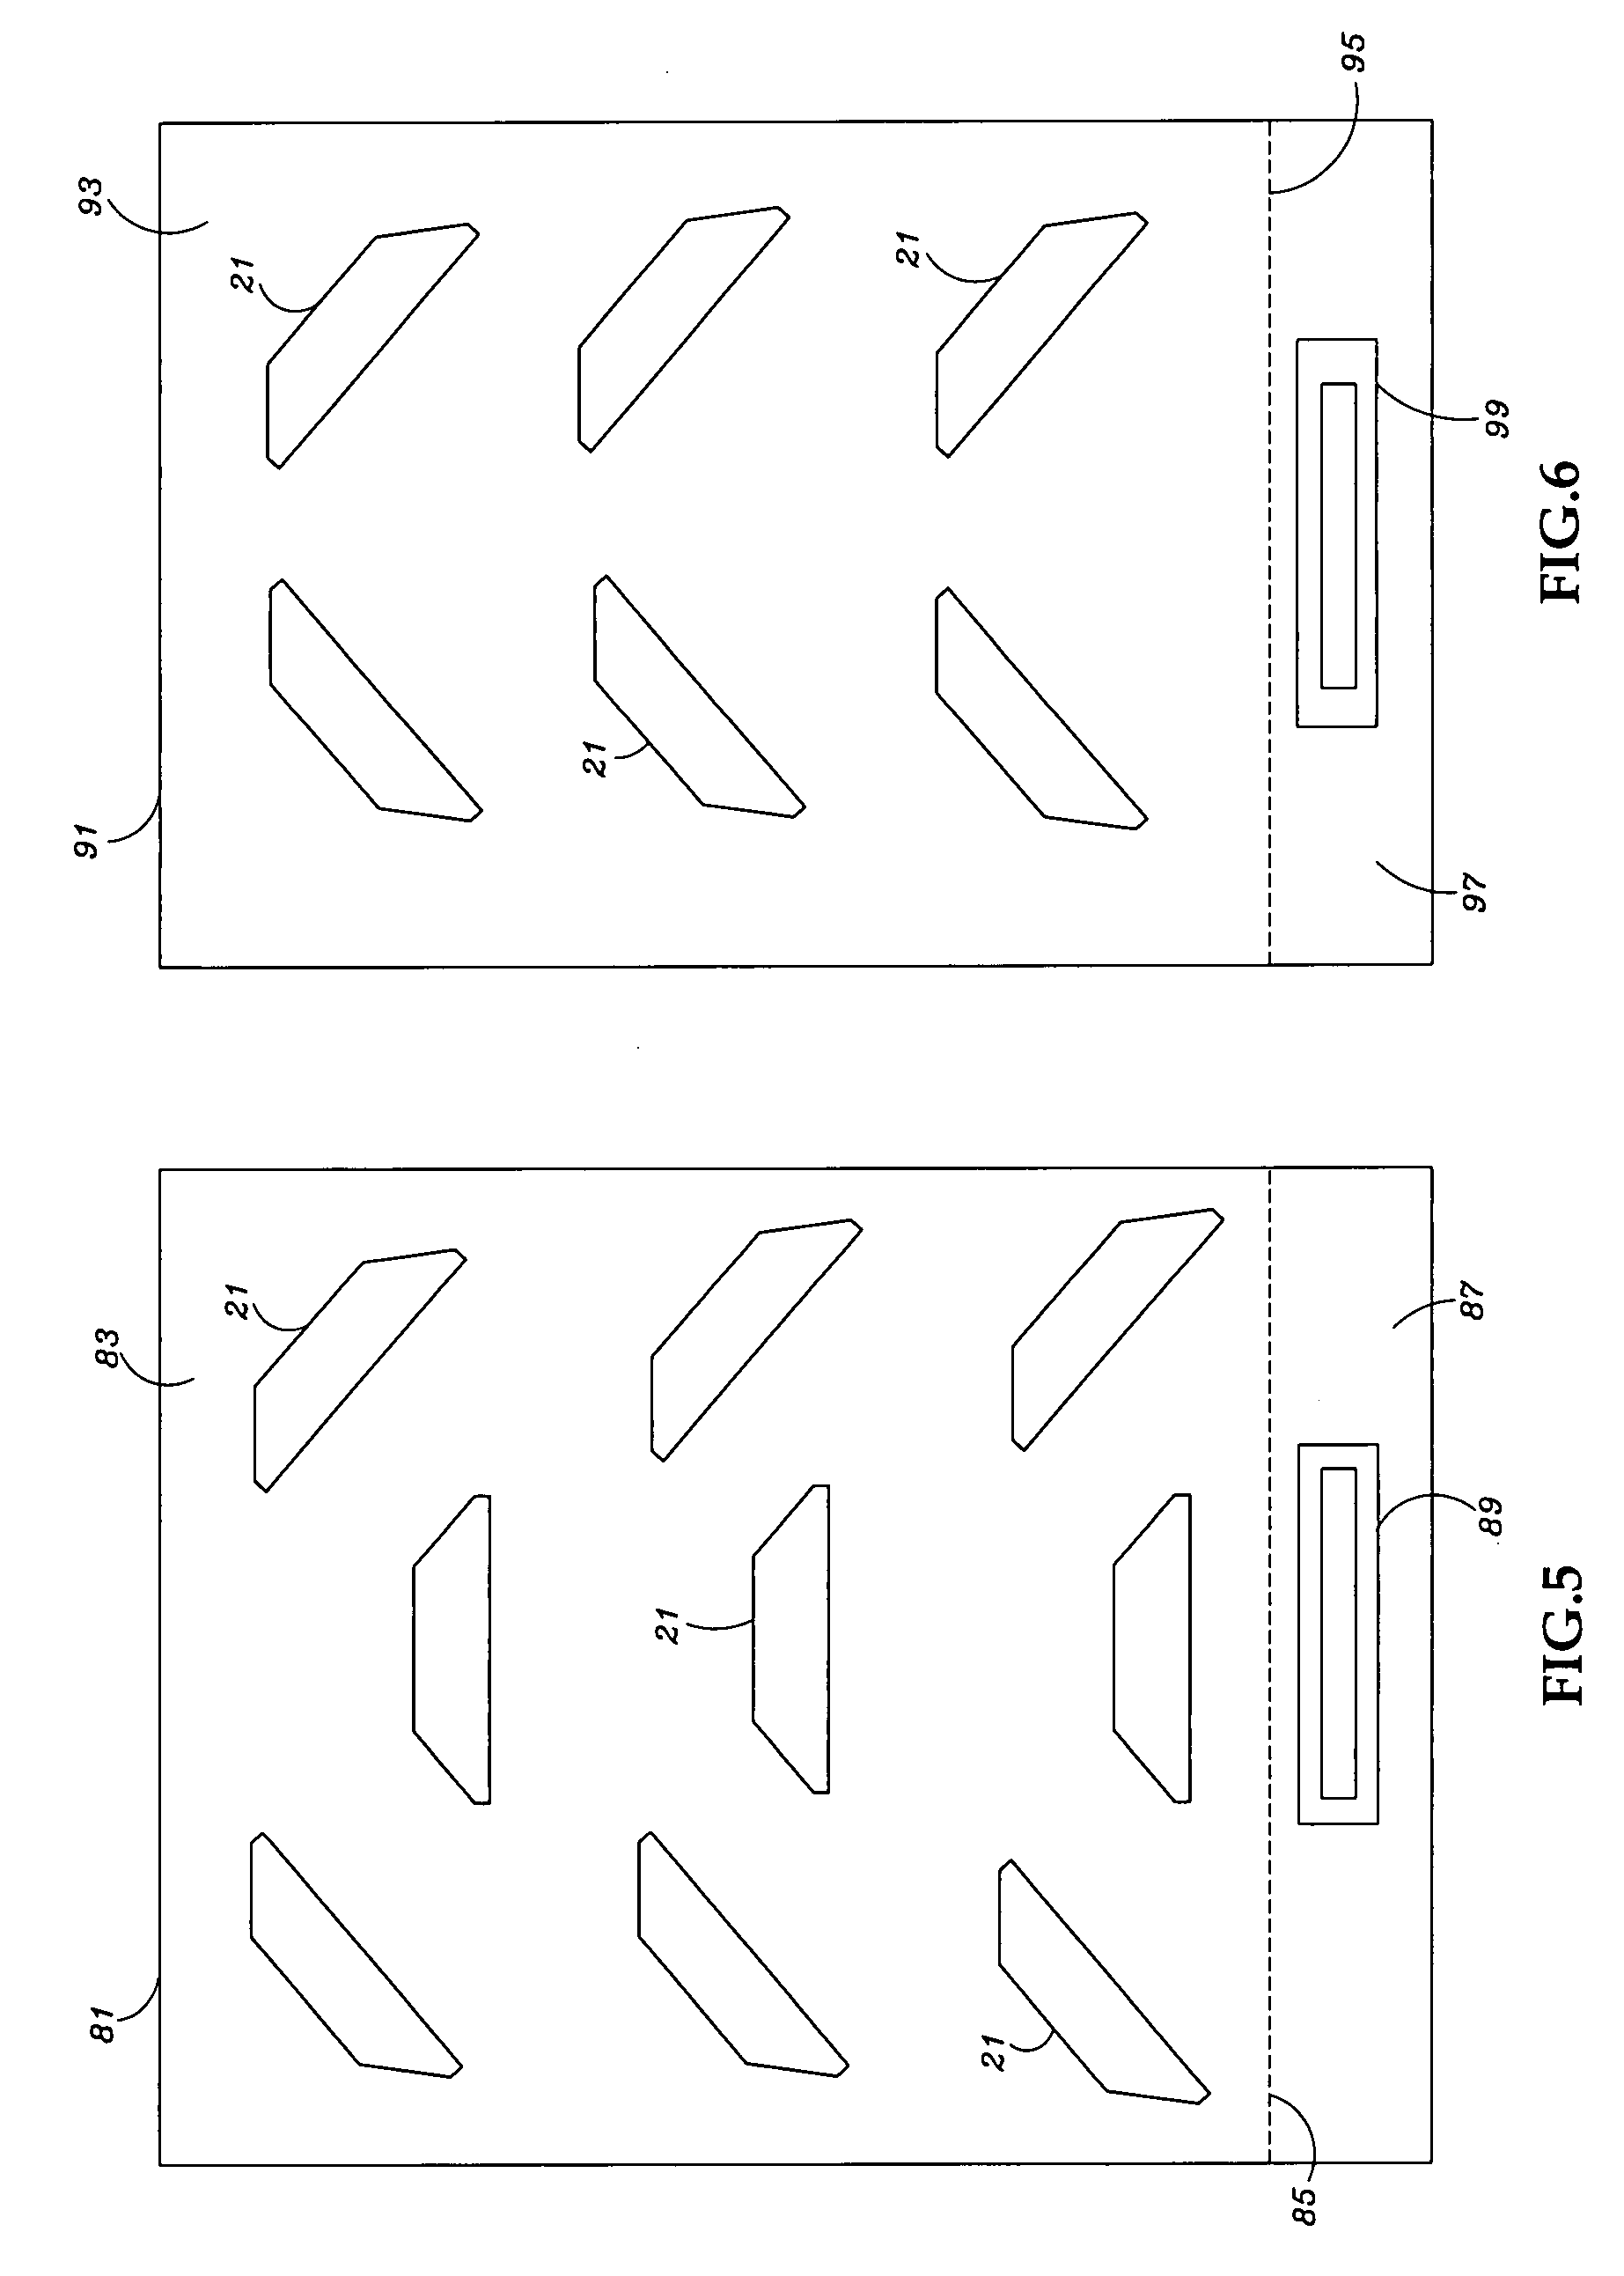 Table topology and arrangement